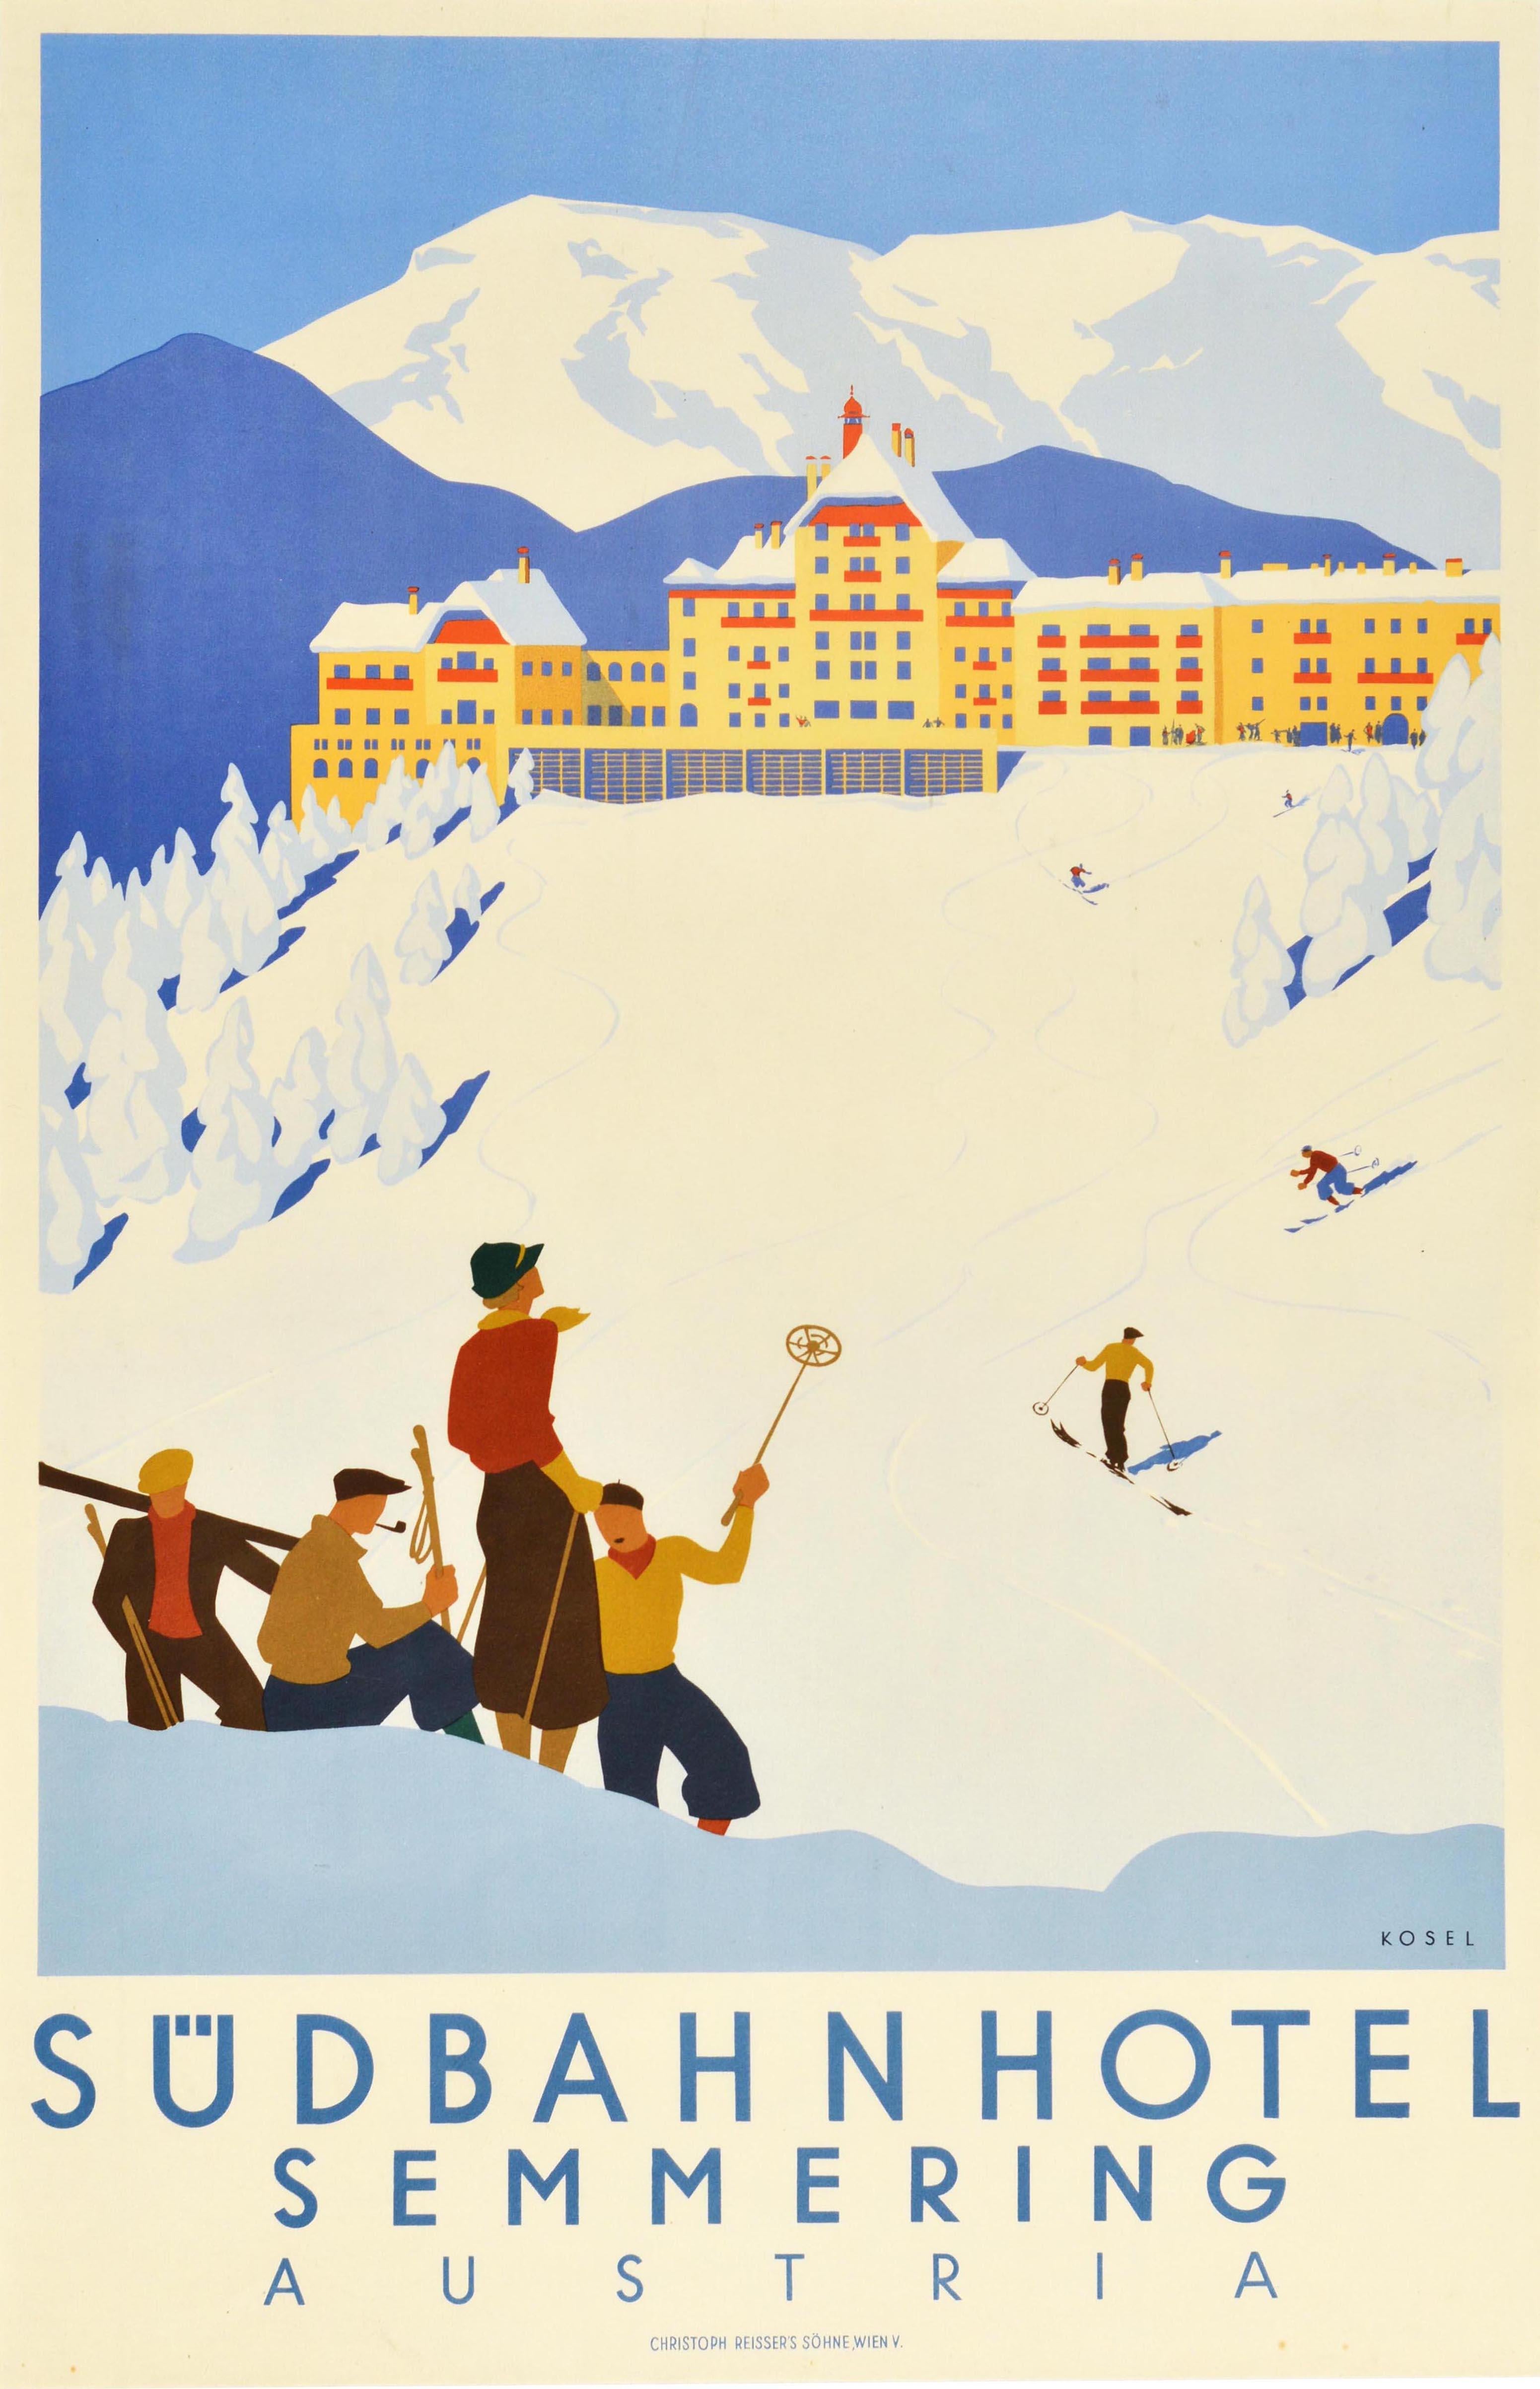 Original vintage travel advertising poster for the Sudbahnhotel in Semmering featuring a great Art Deco style image of people skiing down the slopes in front of the imposing grand hotel with snowy mountains on the horizon and snow topped trees on